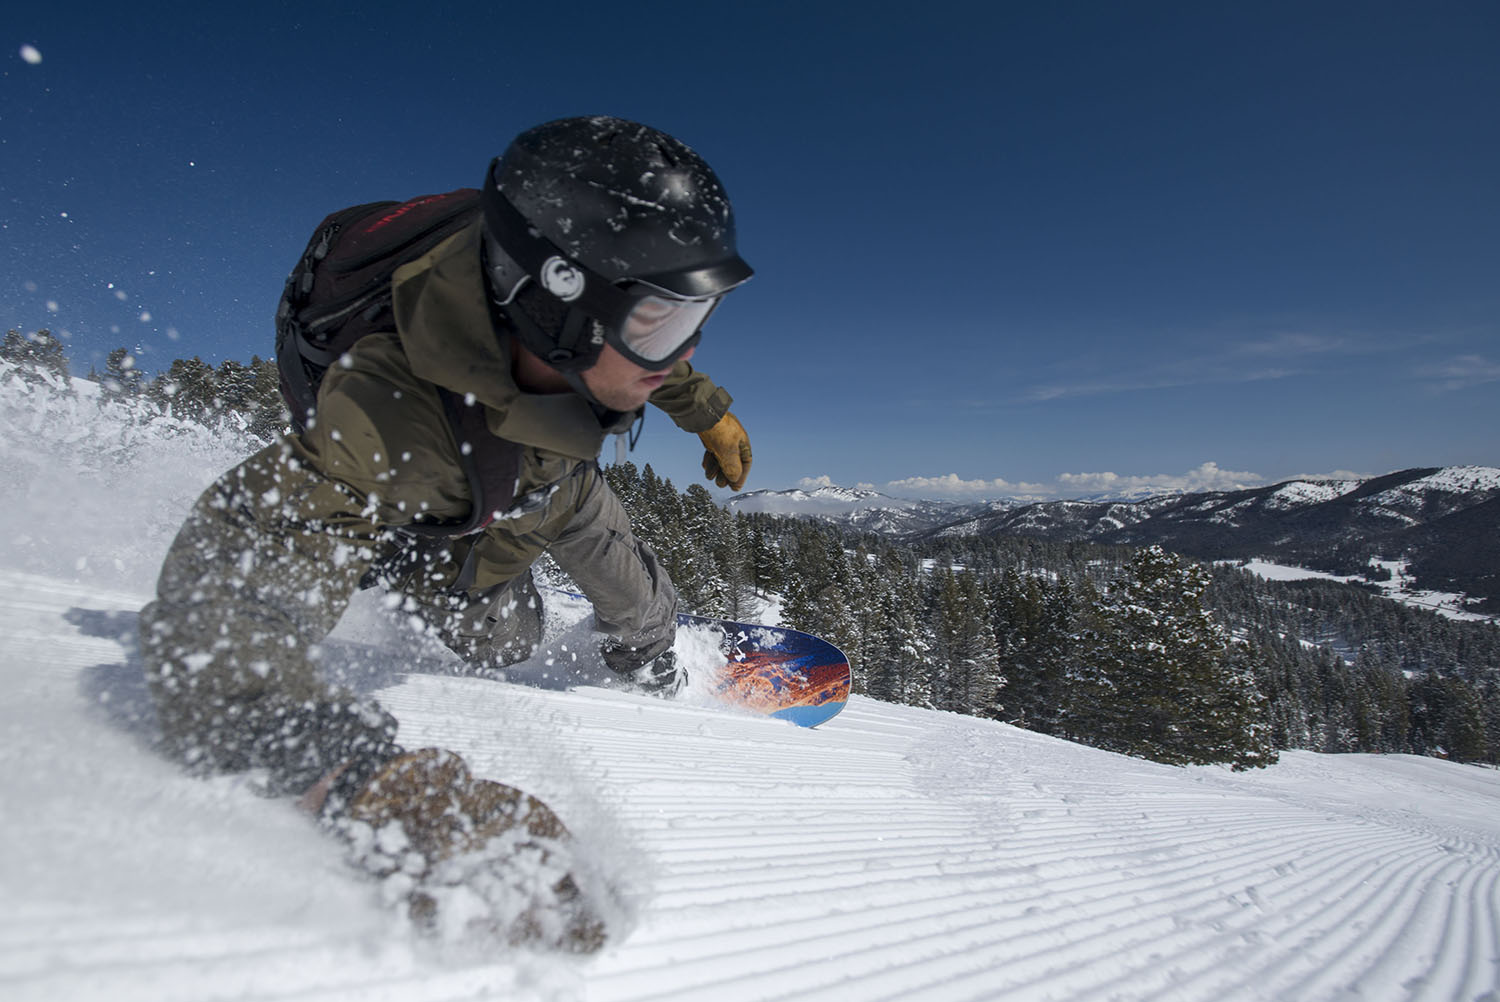 If the corduroy fits, shred it.  Kyle Cremer stitches the fabric at Bridger Bowl.